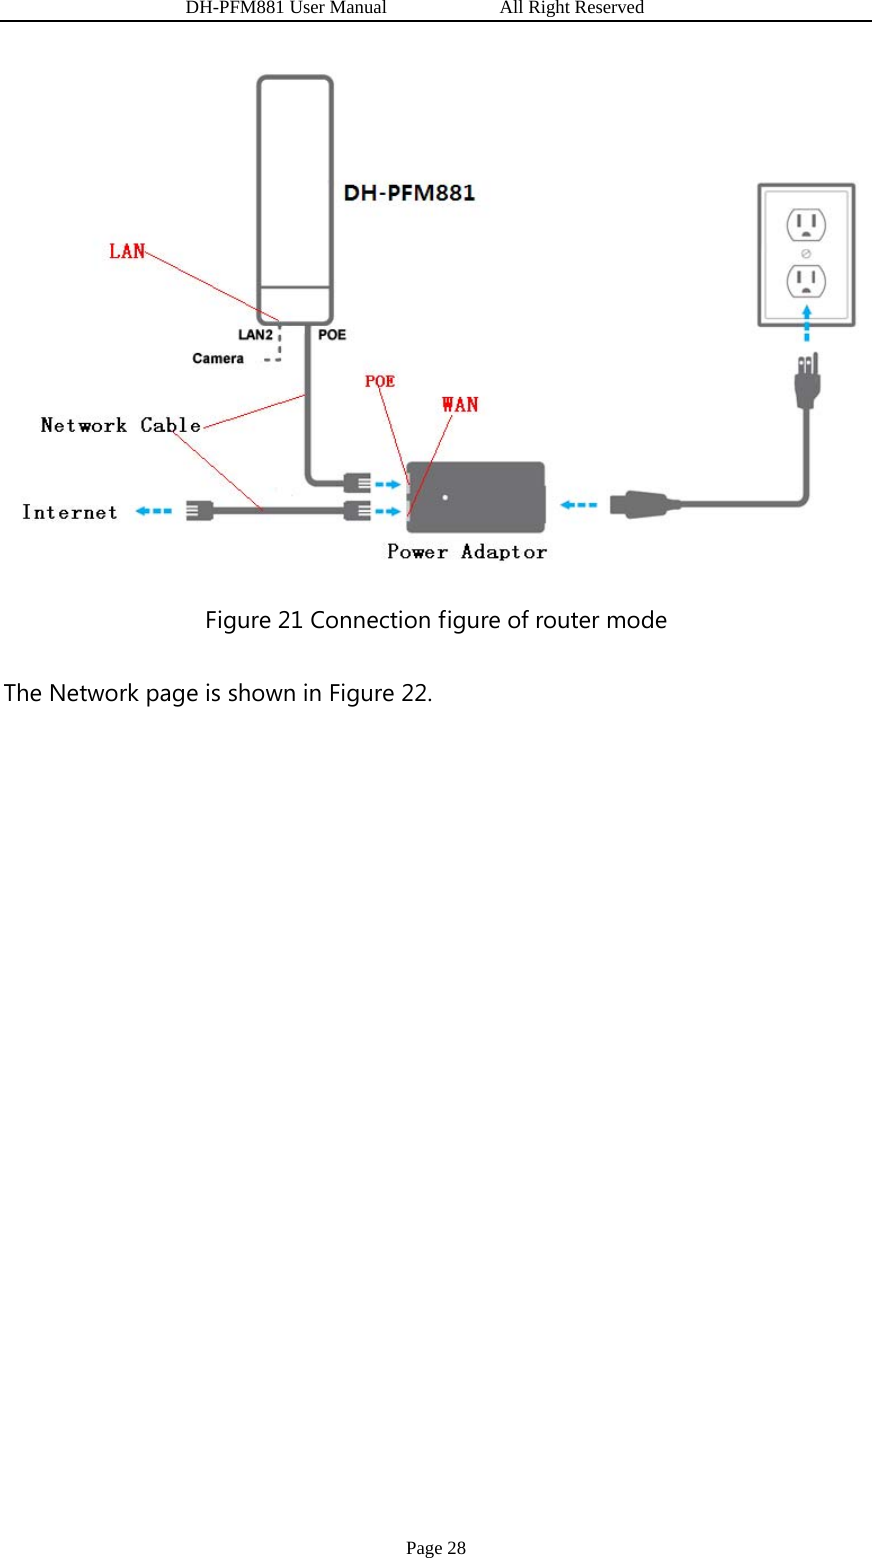                   DH-PFM881 User Manual            All Right Reserved Page 28  Figure 21 Connection figure of router mode The Network page is shown in Figure 22. 